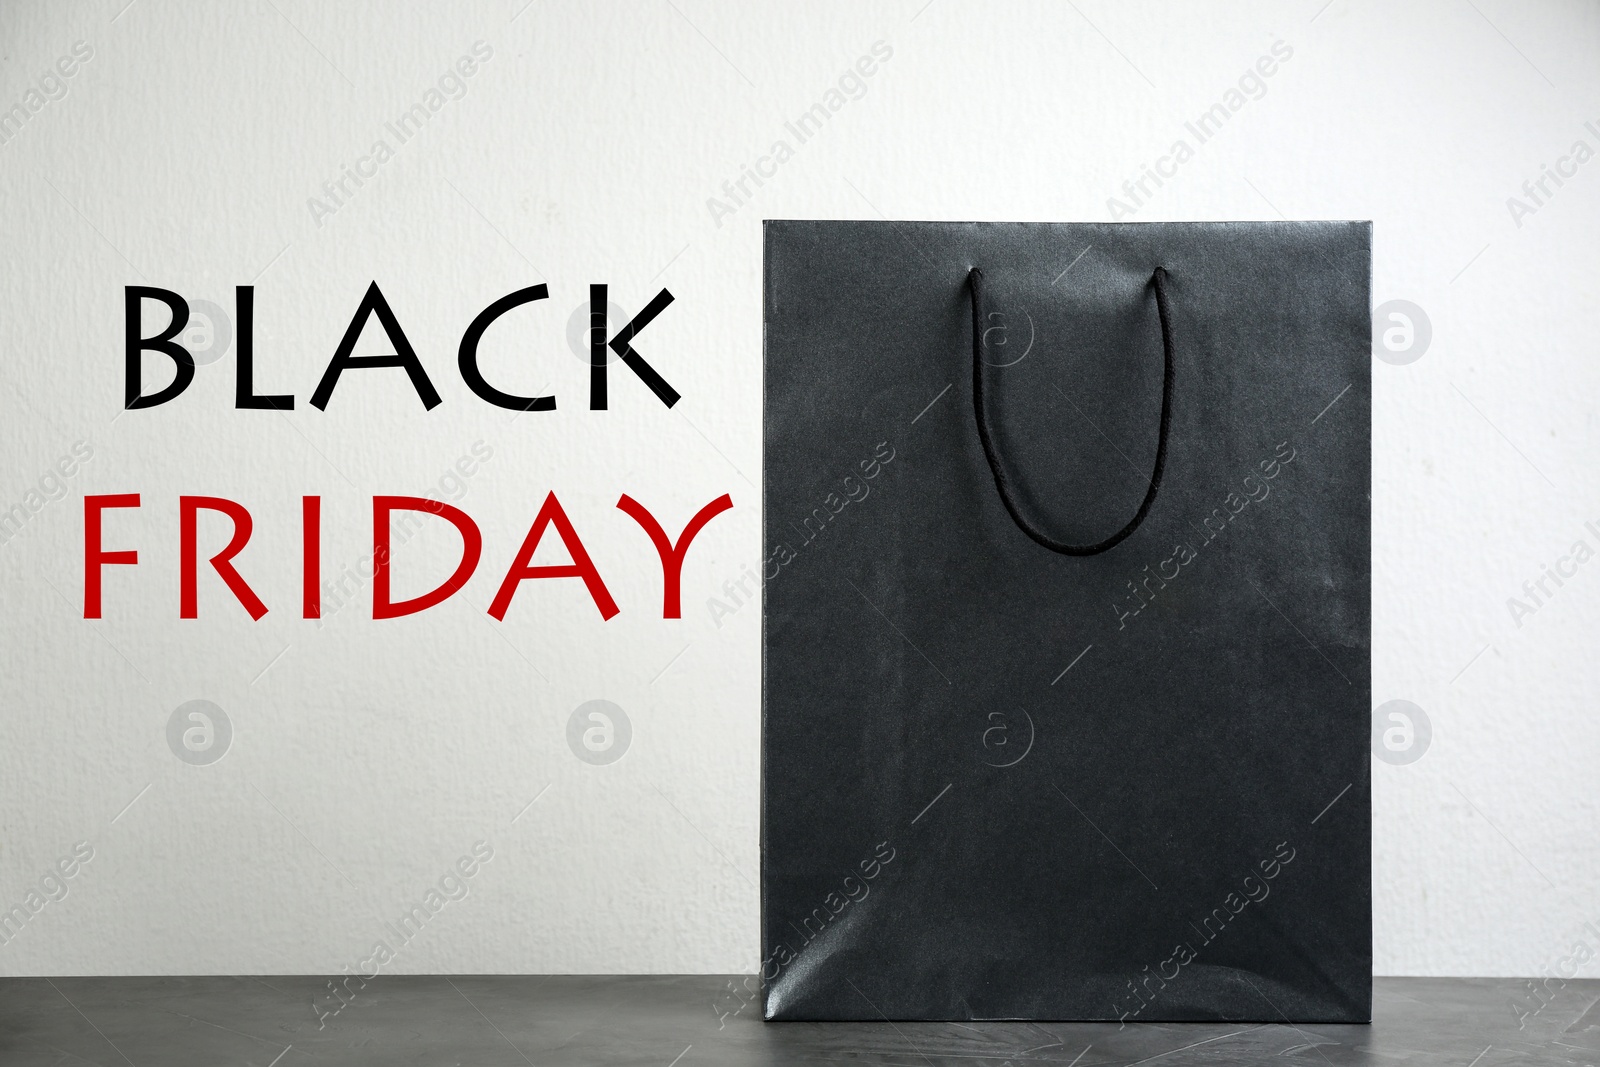 Image of Shopping bag and text BLACK FRIDAY on light background